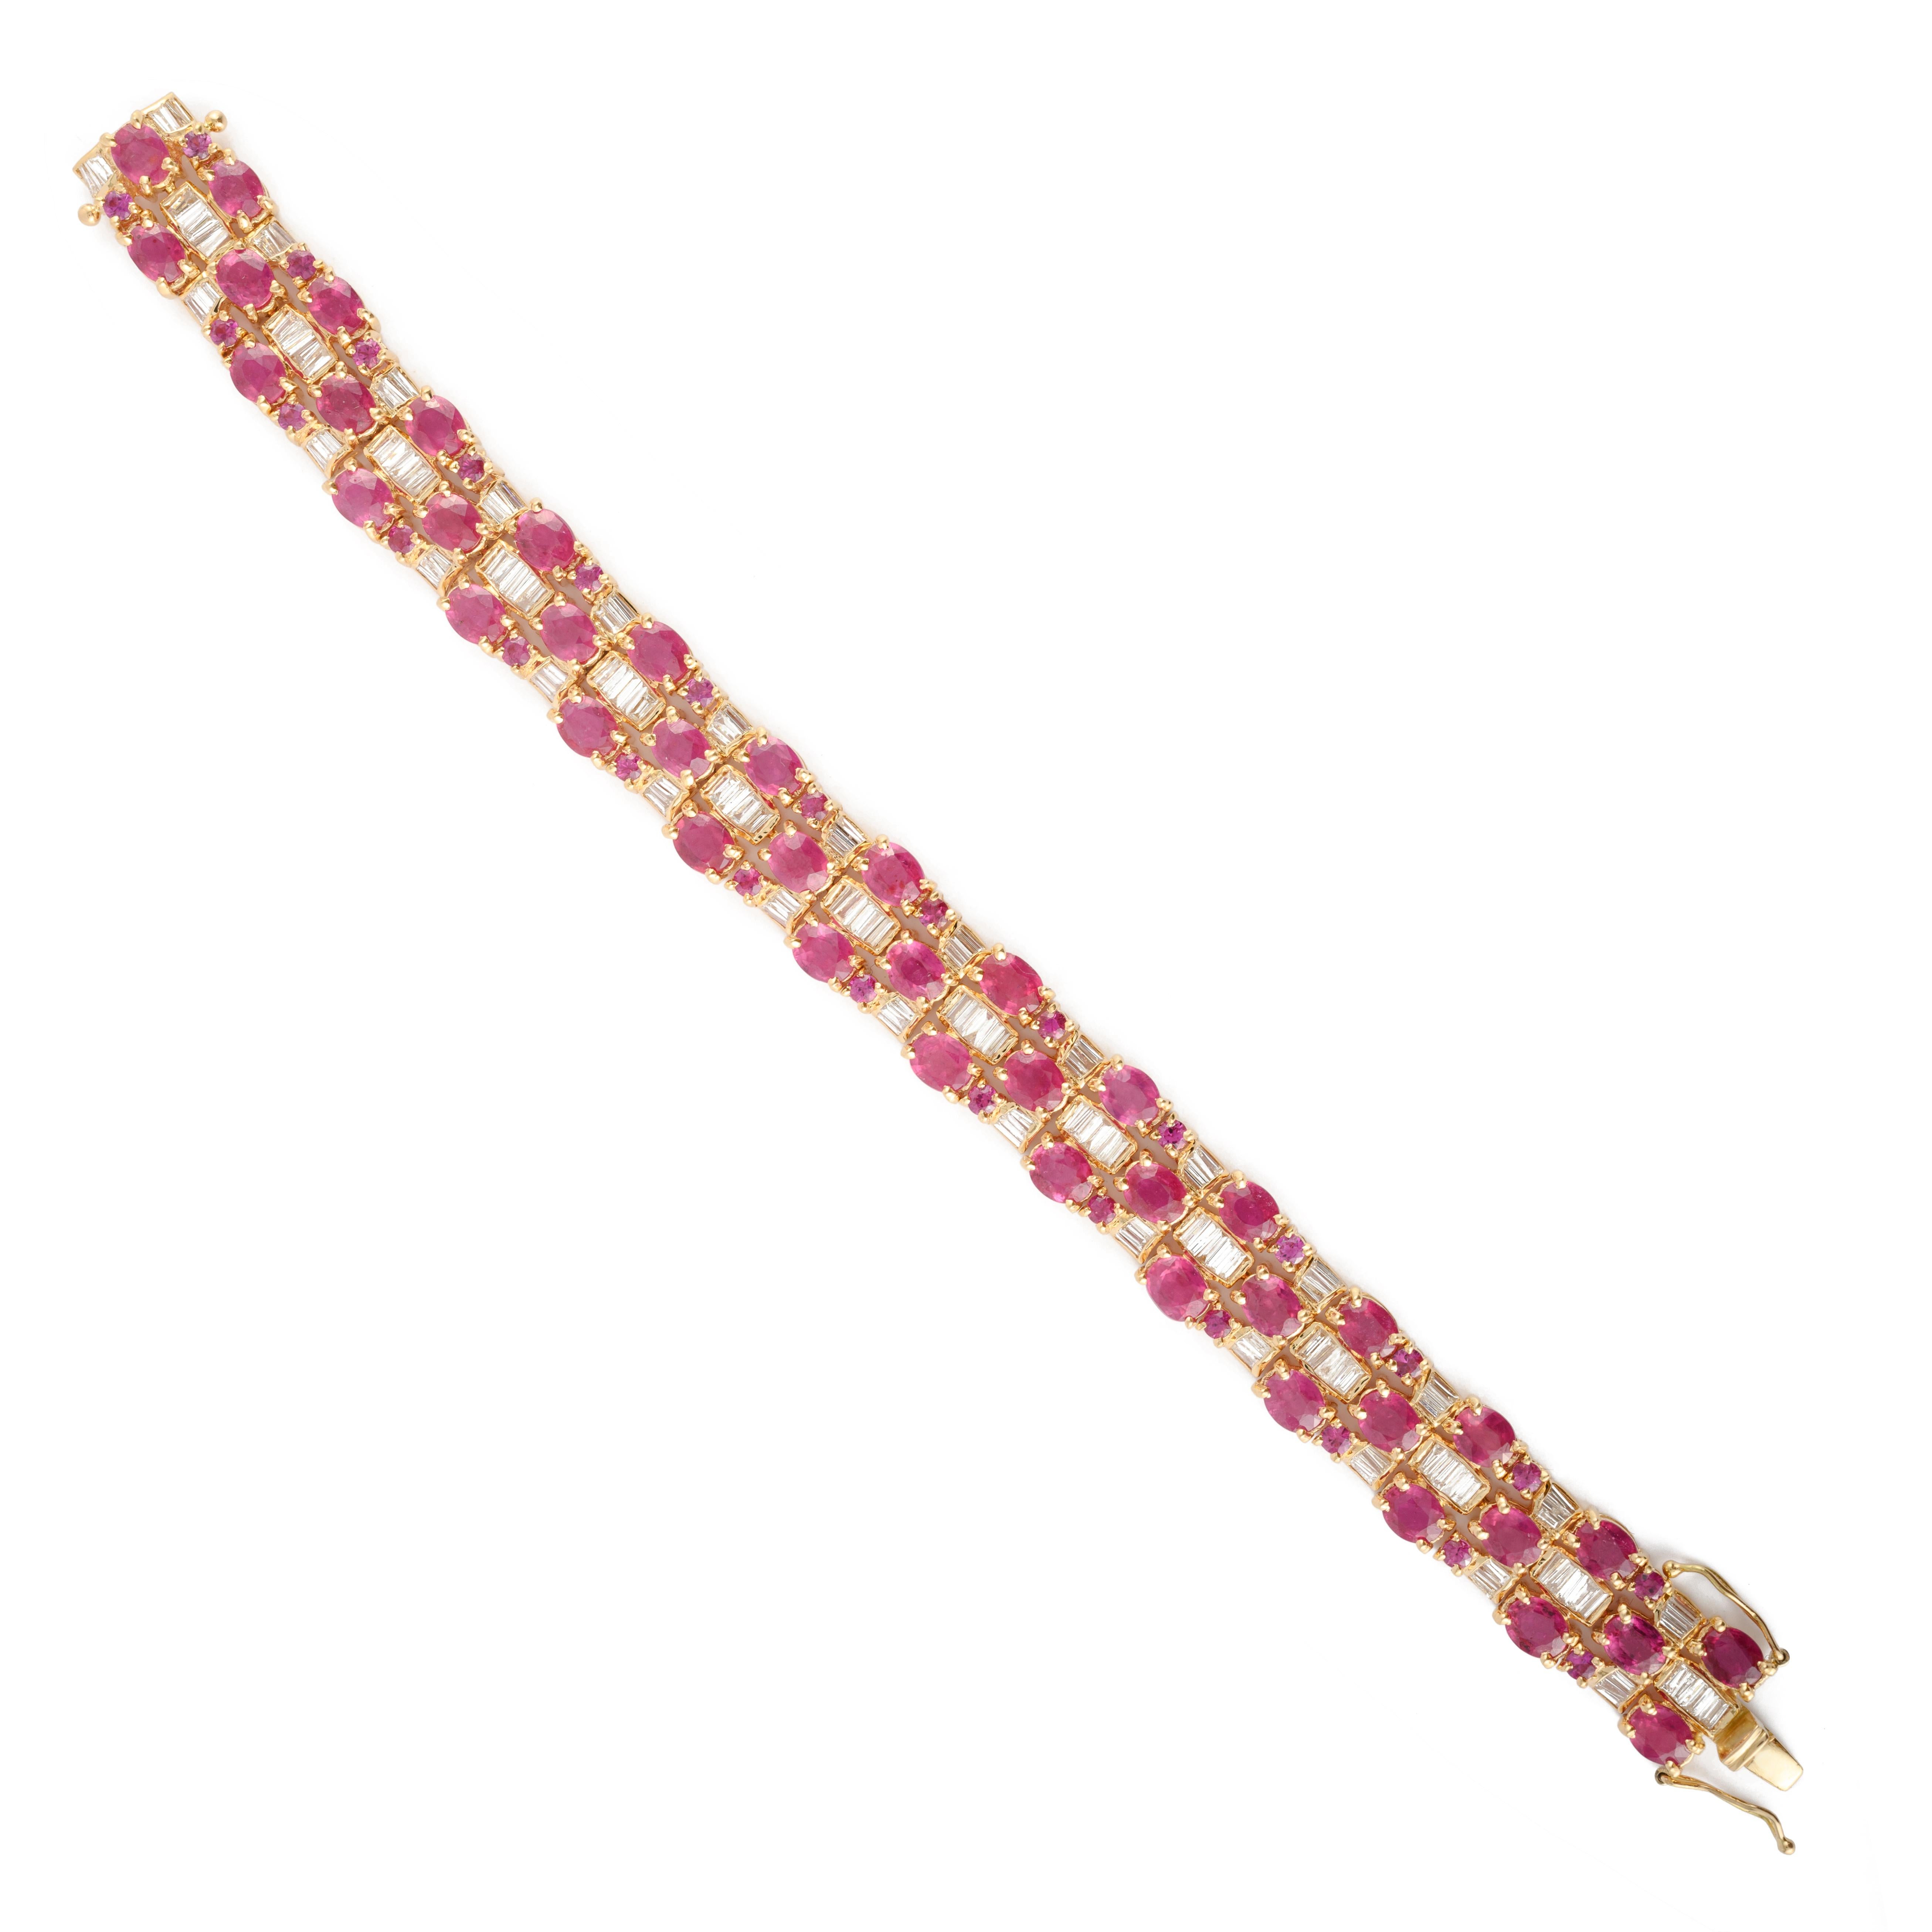 Mixed Cut 29.88 Carat Natural Ruby Art Deco Diamond Bracelet in 18k Solid Yellow Gold For Sale